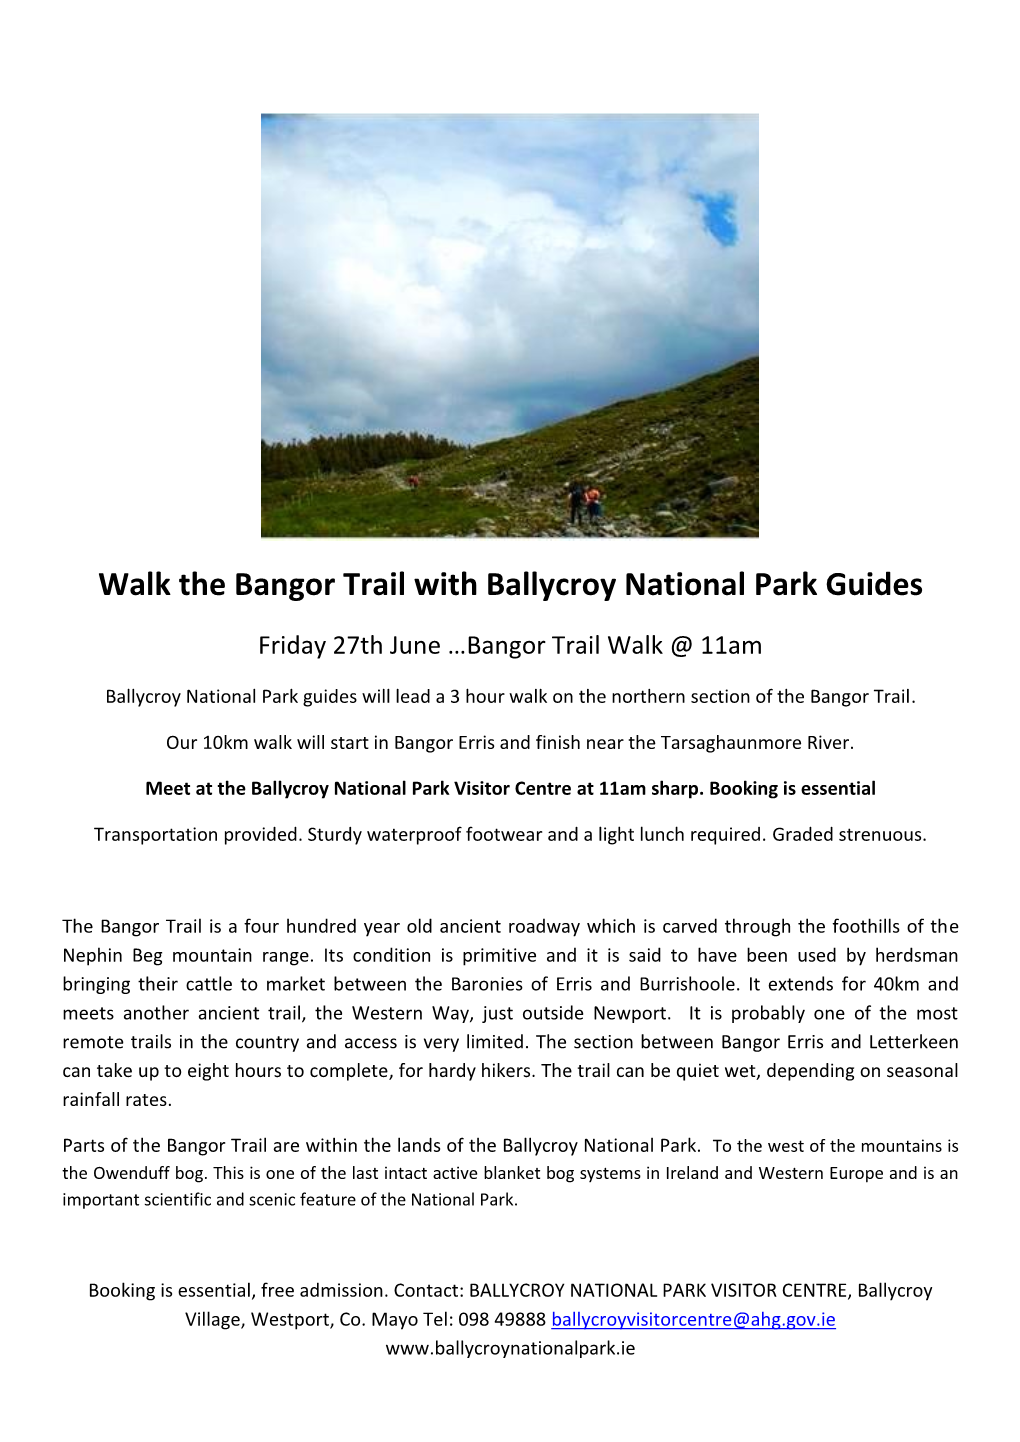 Walk the Bangor Trail with Ballycroy National Park Guides